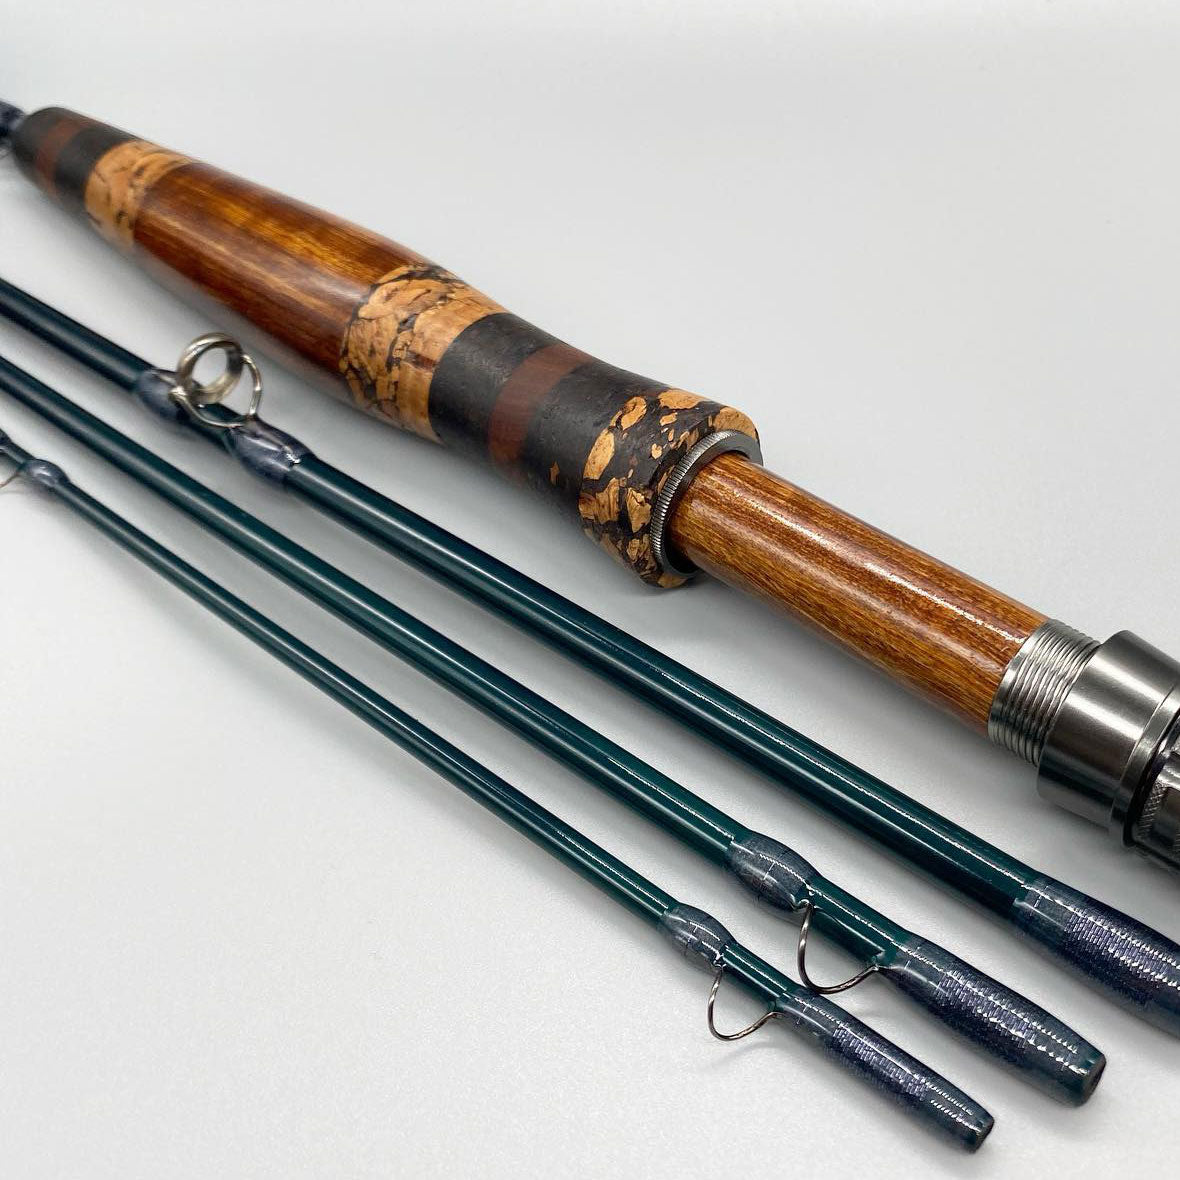 Fly Fishing Rod Guides, Snake Guides Fishing Rods